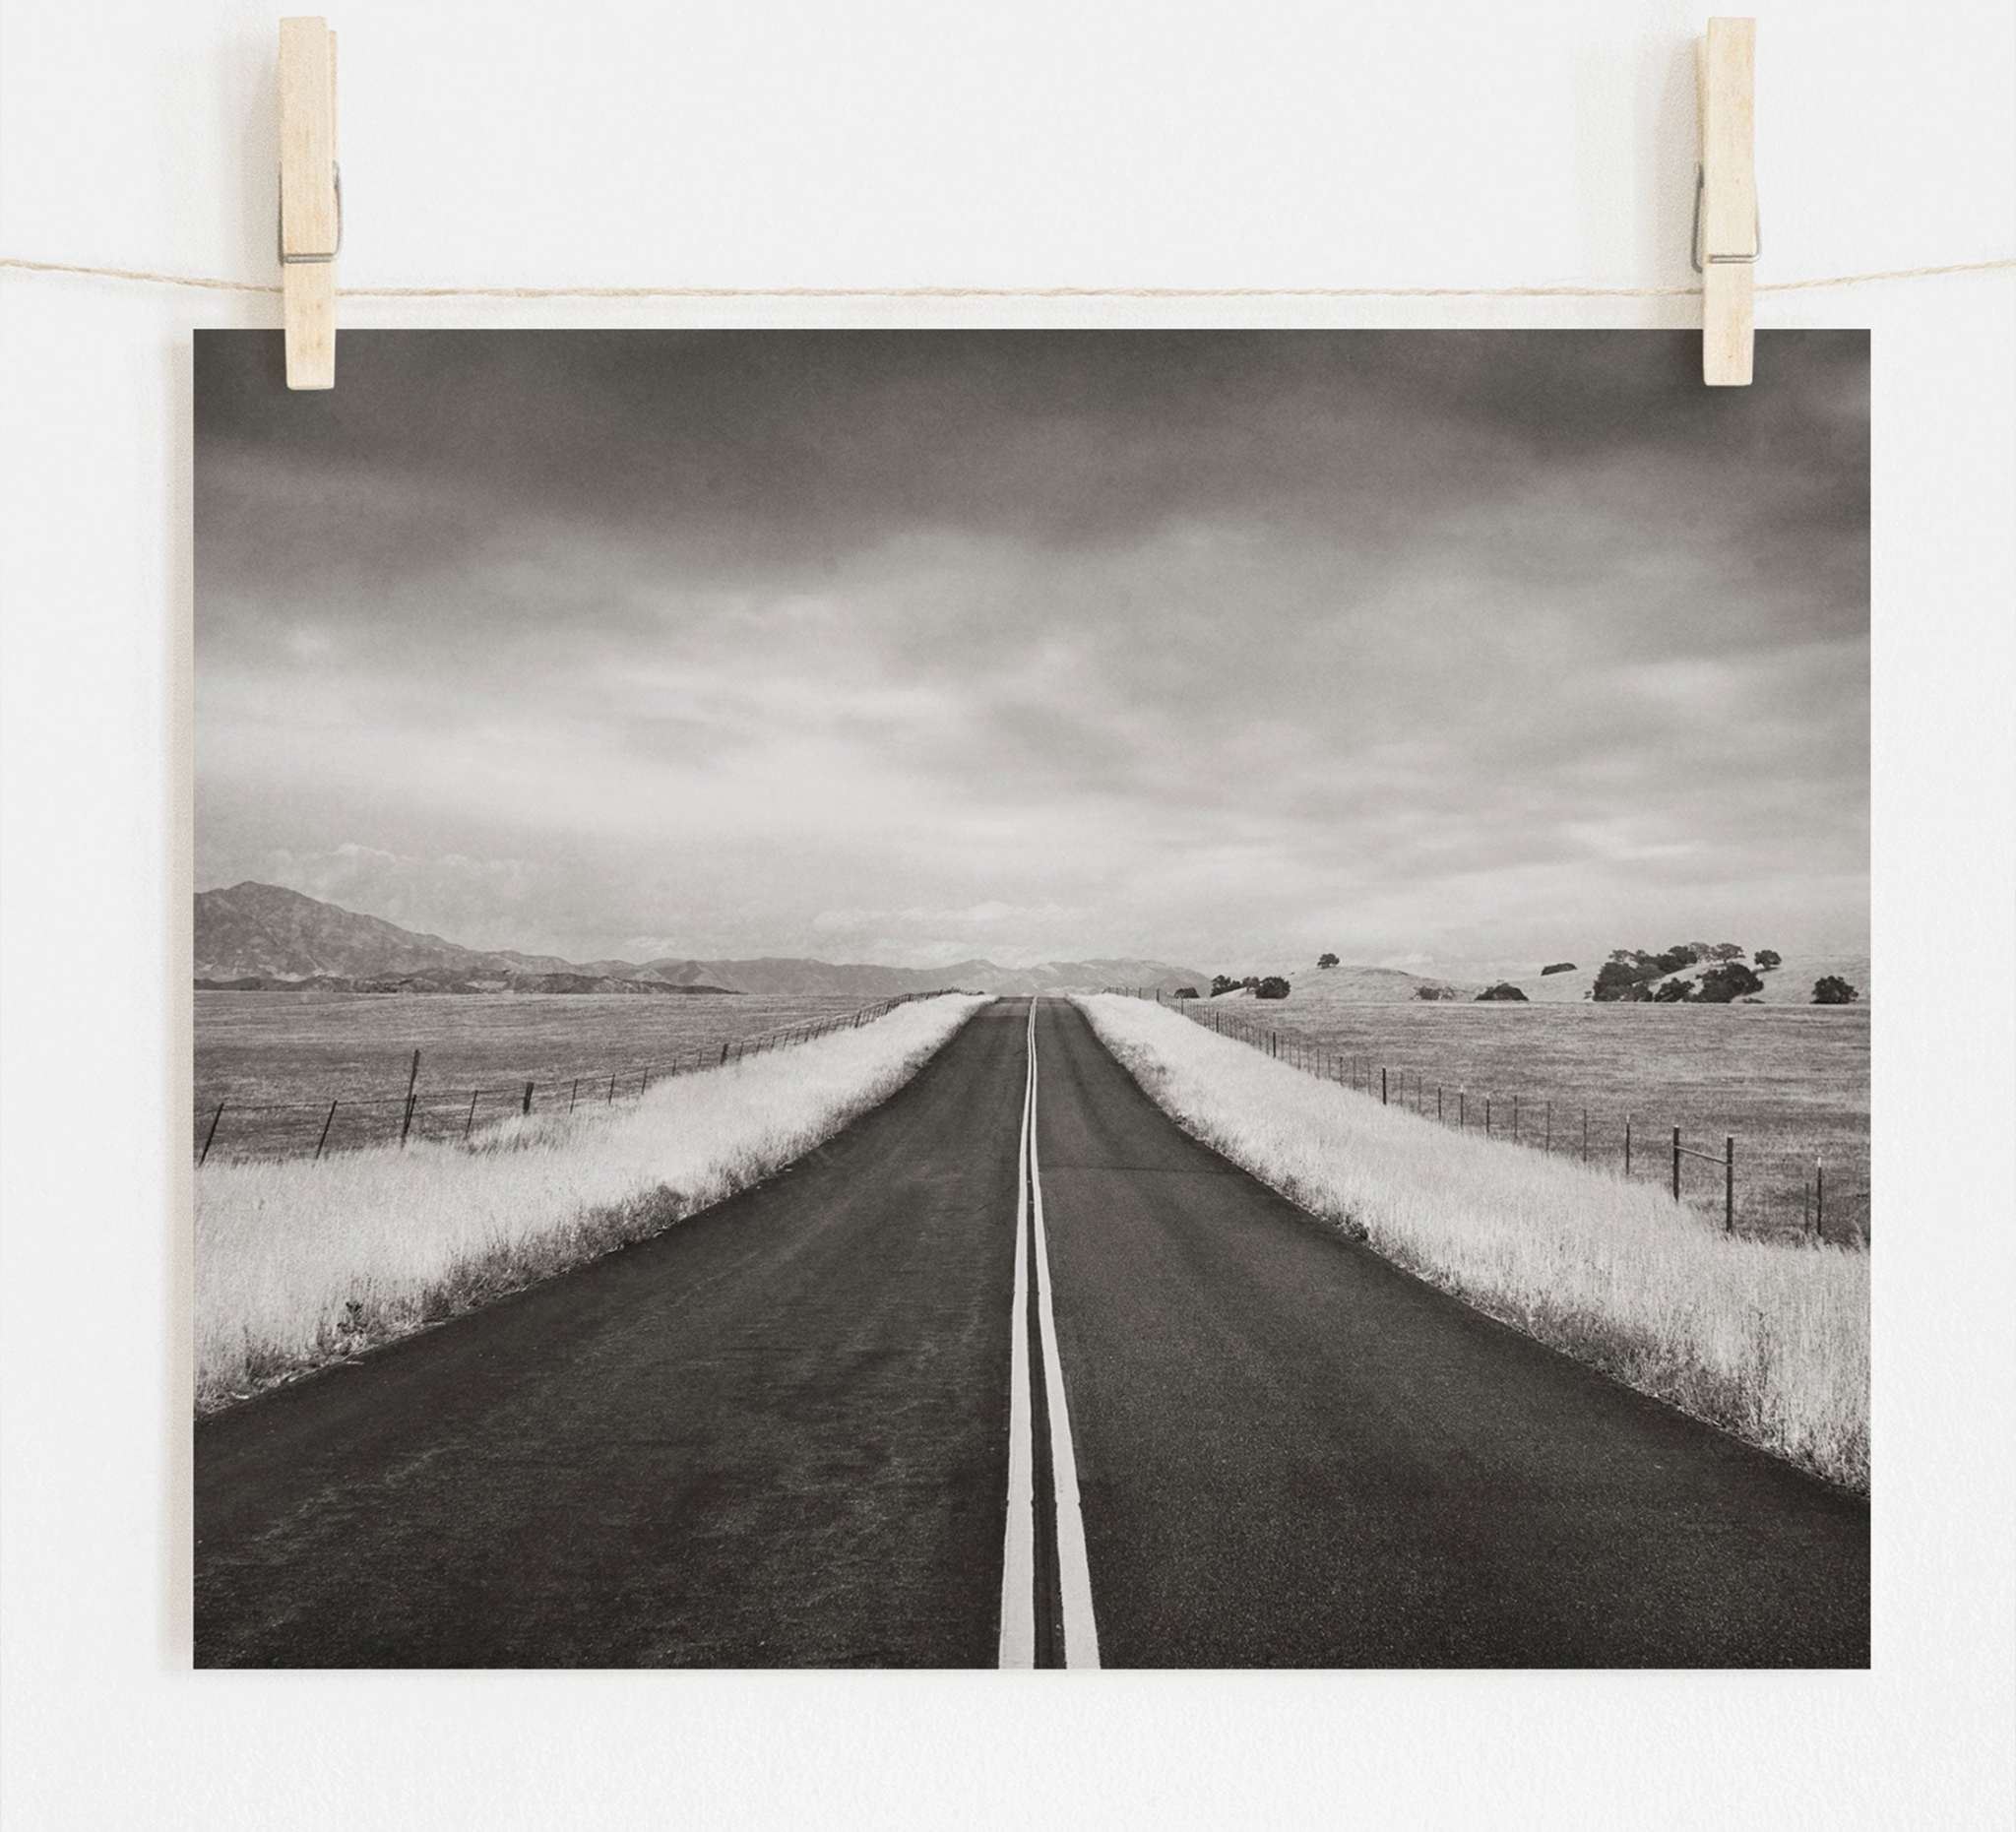 Offley Green&#39;s Black and White Rural Landscape Art, &#39;American Road Trip&#39;, printed on archival photographic paper, features an empty road extending into the distance under a cloudy sky, flanked by fields and mountains in sepia tones.